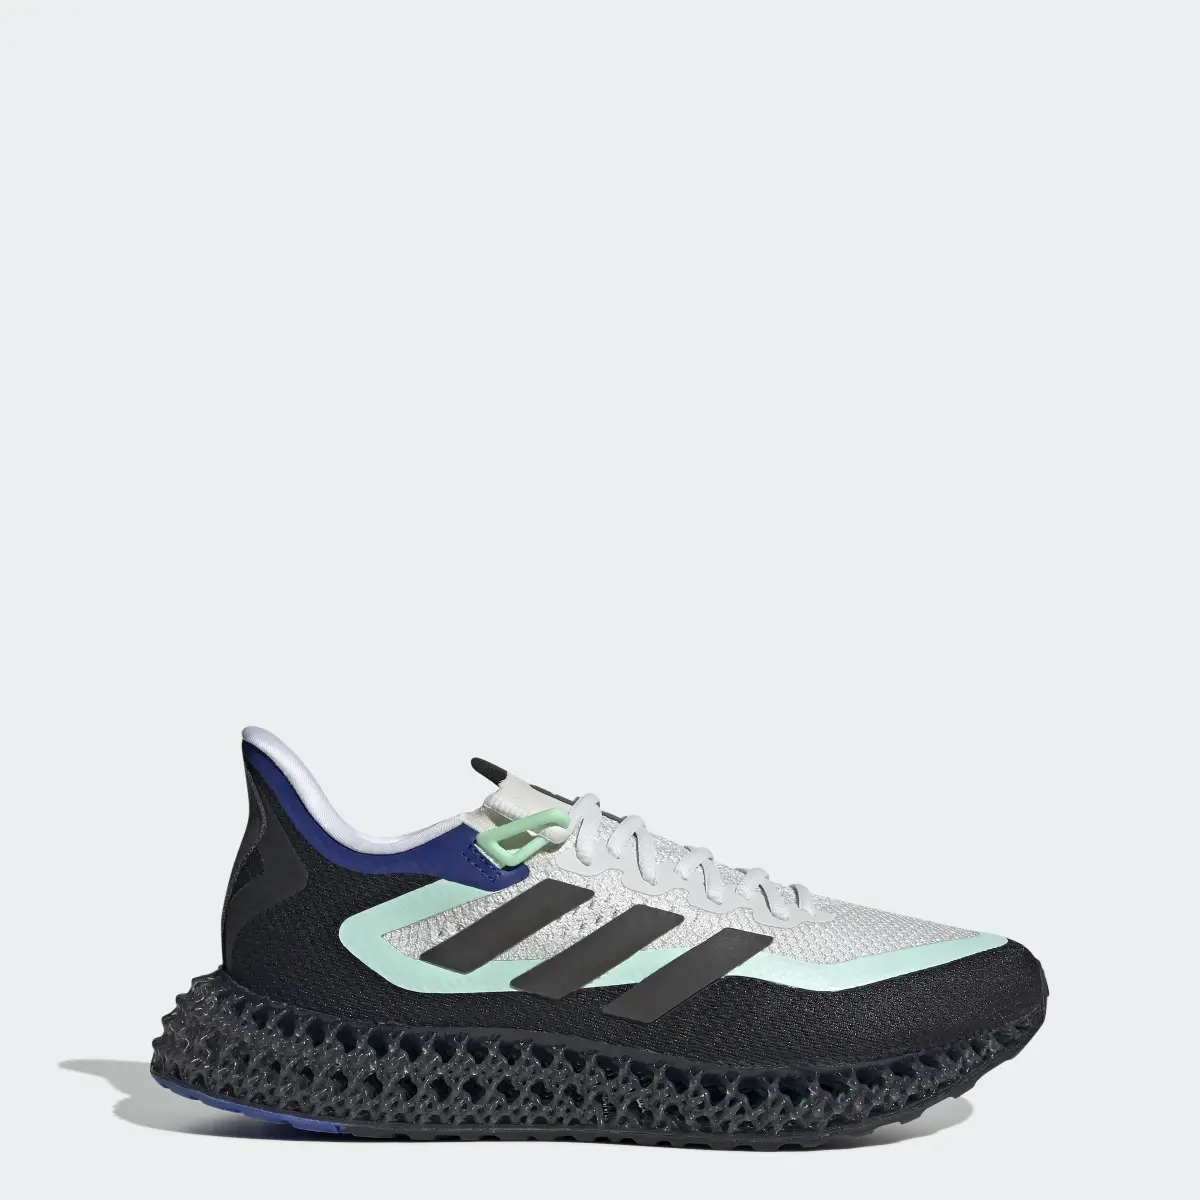 Adidas 4DFWD Running Shoes. 1